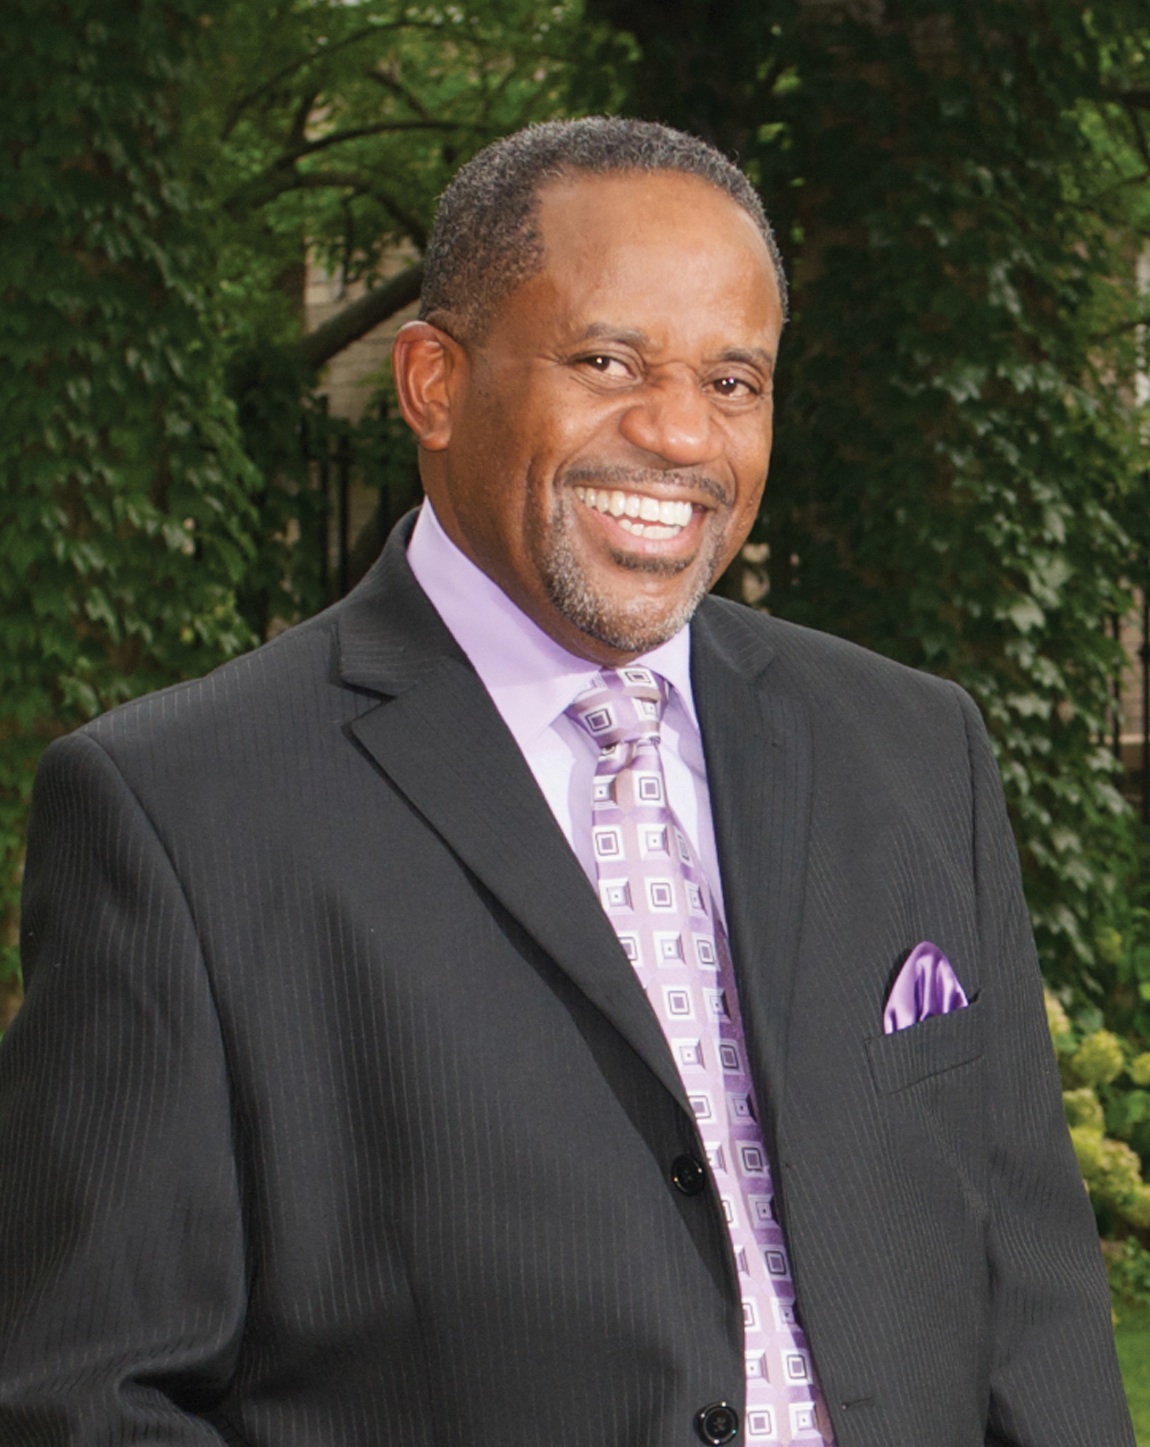 Zeke Morris is the president of the Chicago Association of Realtors.